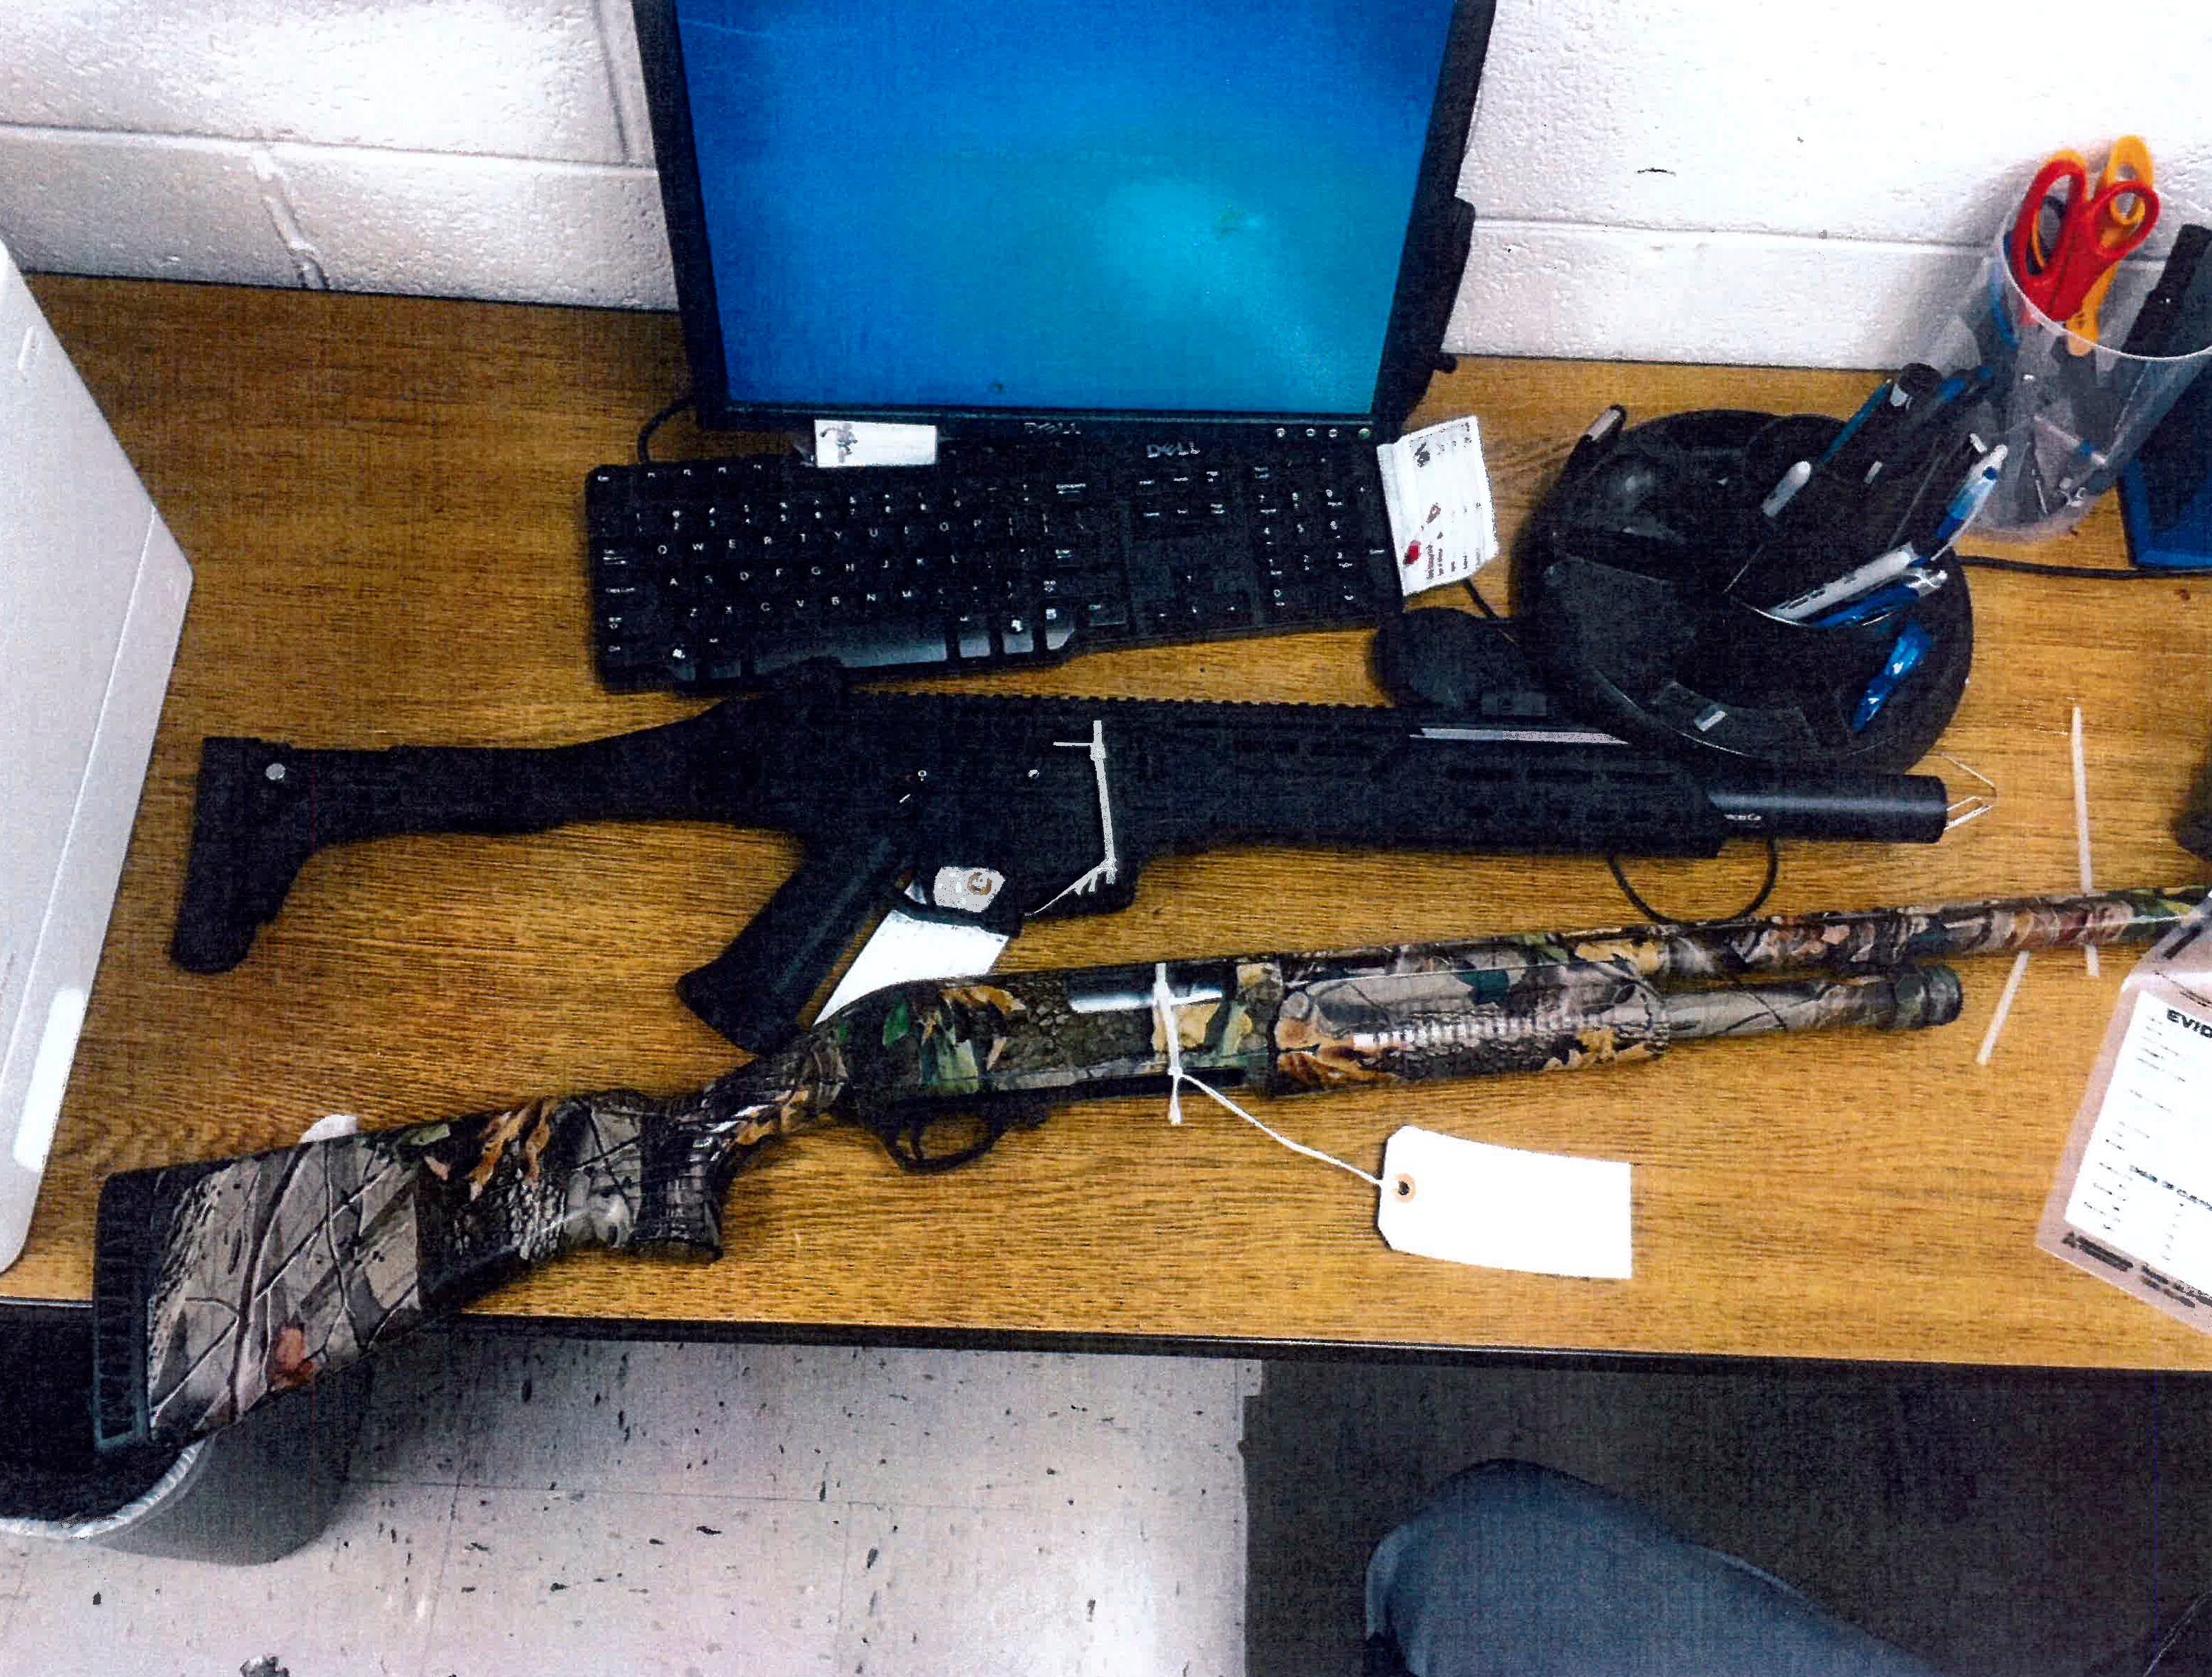 Guns seized by law enforcement from a person who was the subject of Florida’s new red flag law.